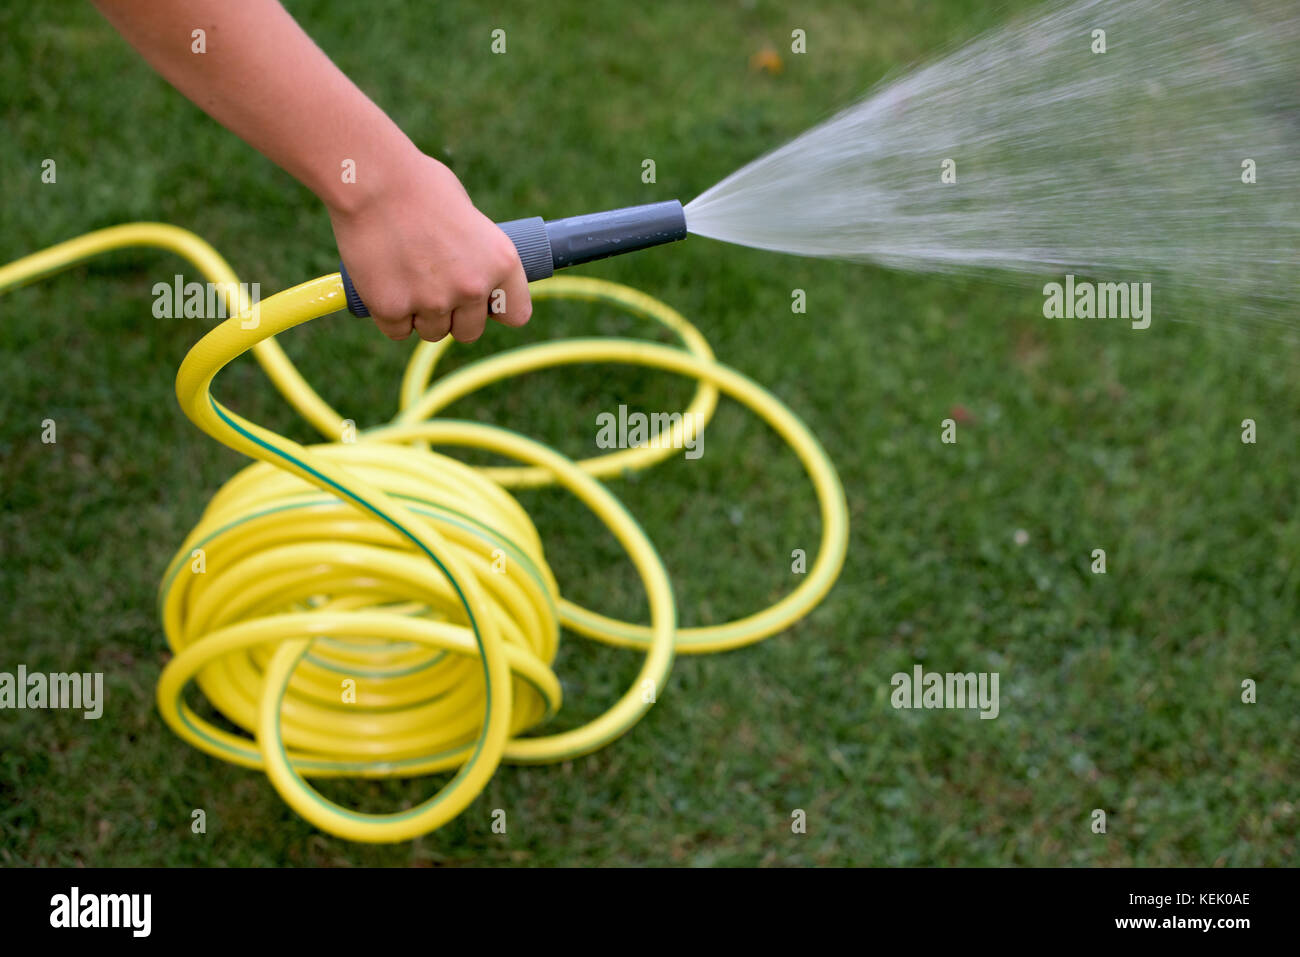 Yellow plastic hose pipe with sprayer at the end Stock Photo